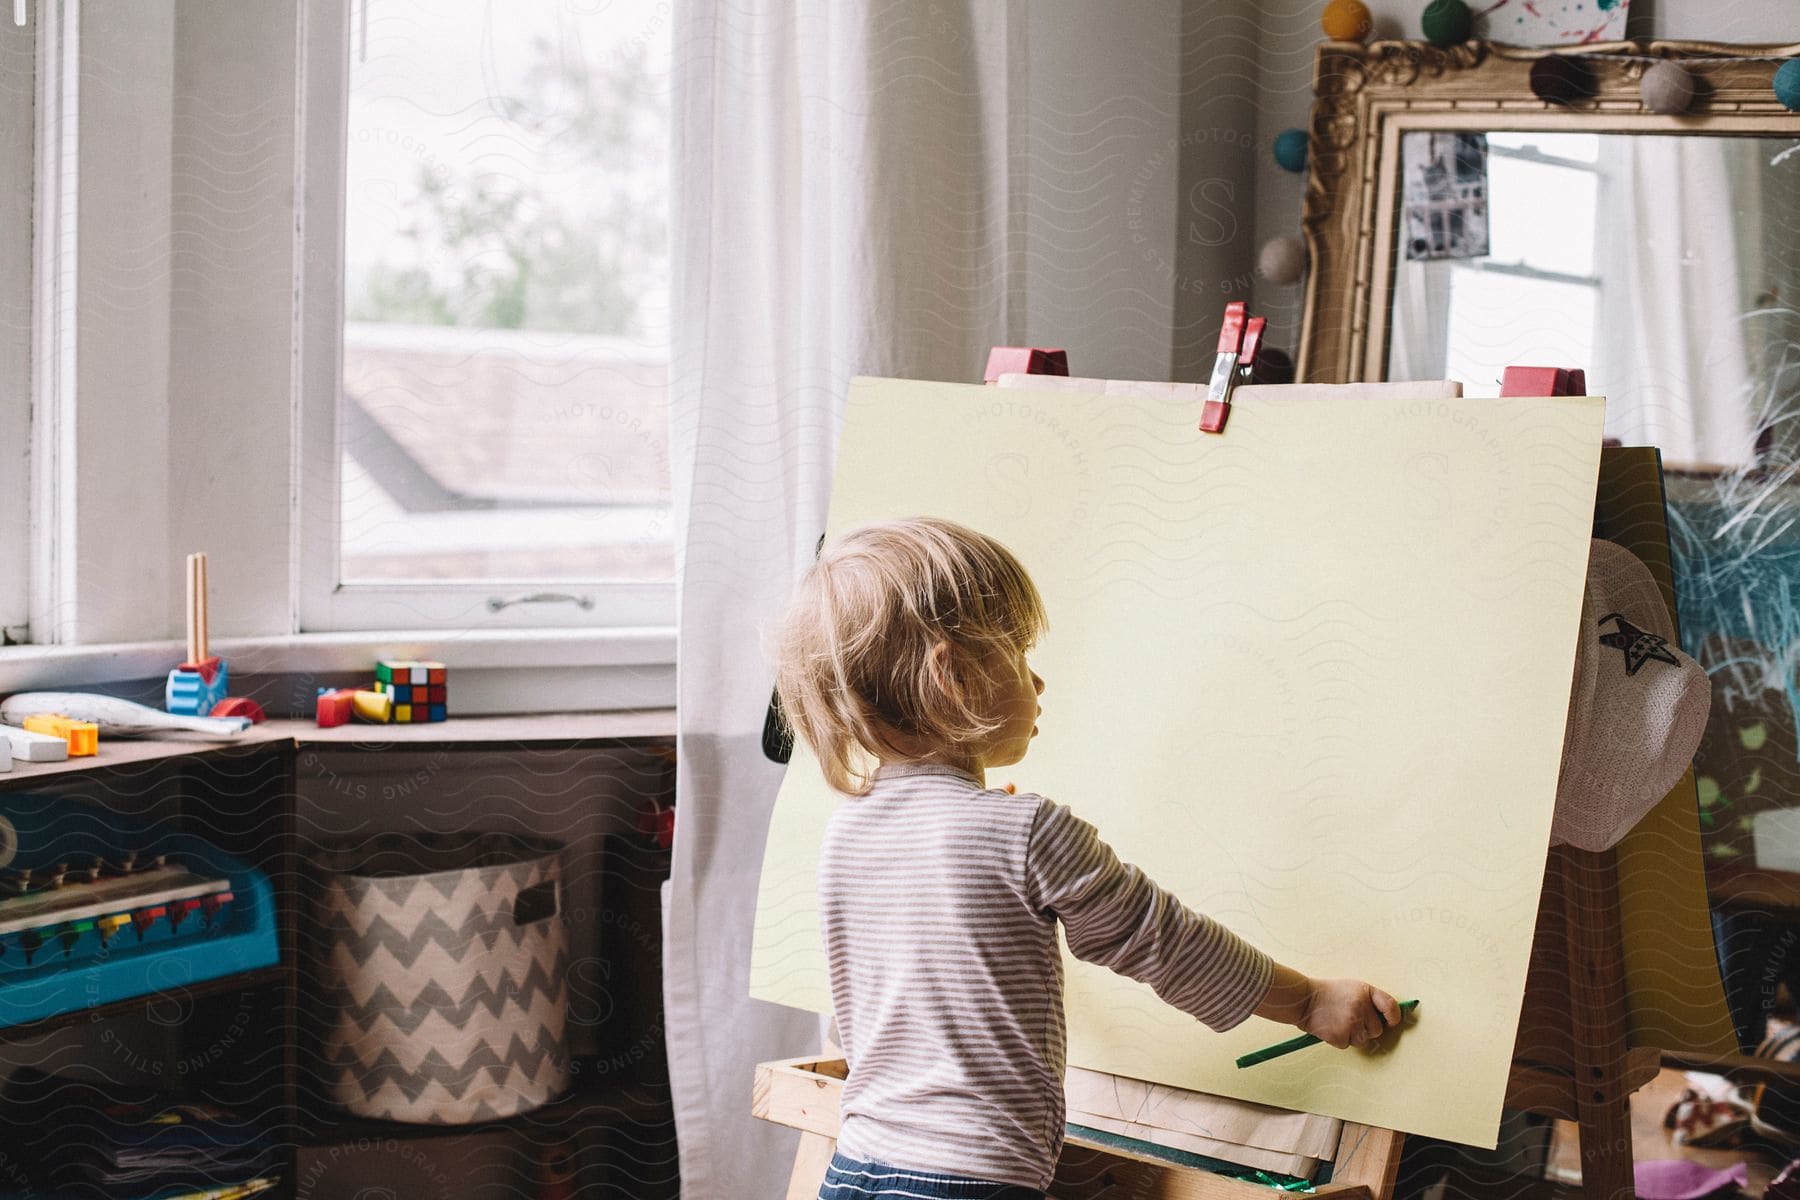 Small child standing in front of a blank easel ready to draw